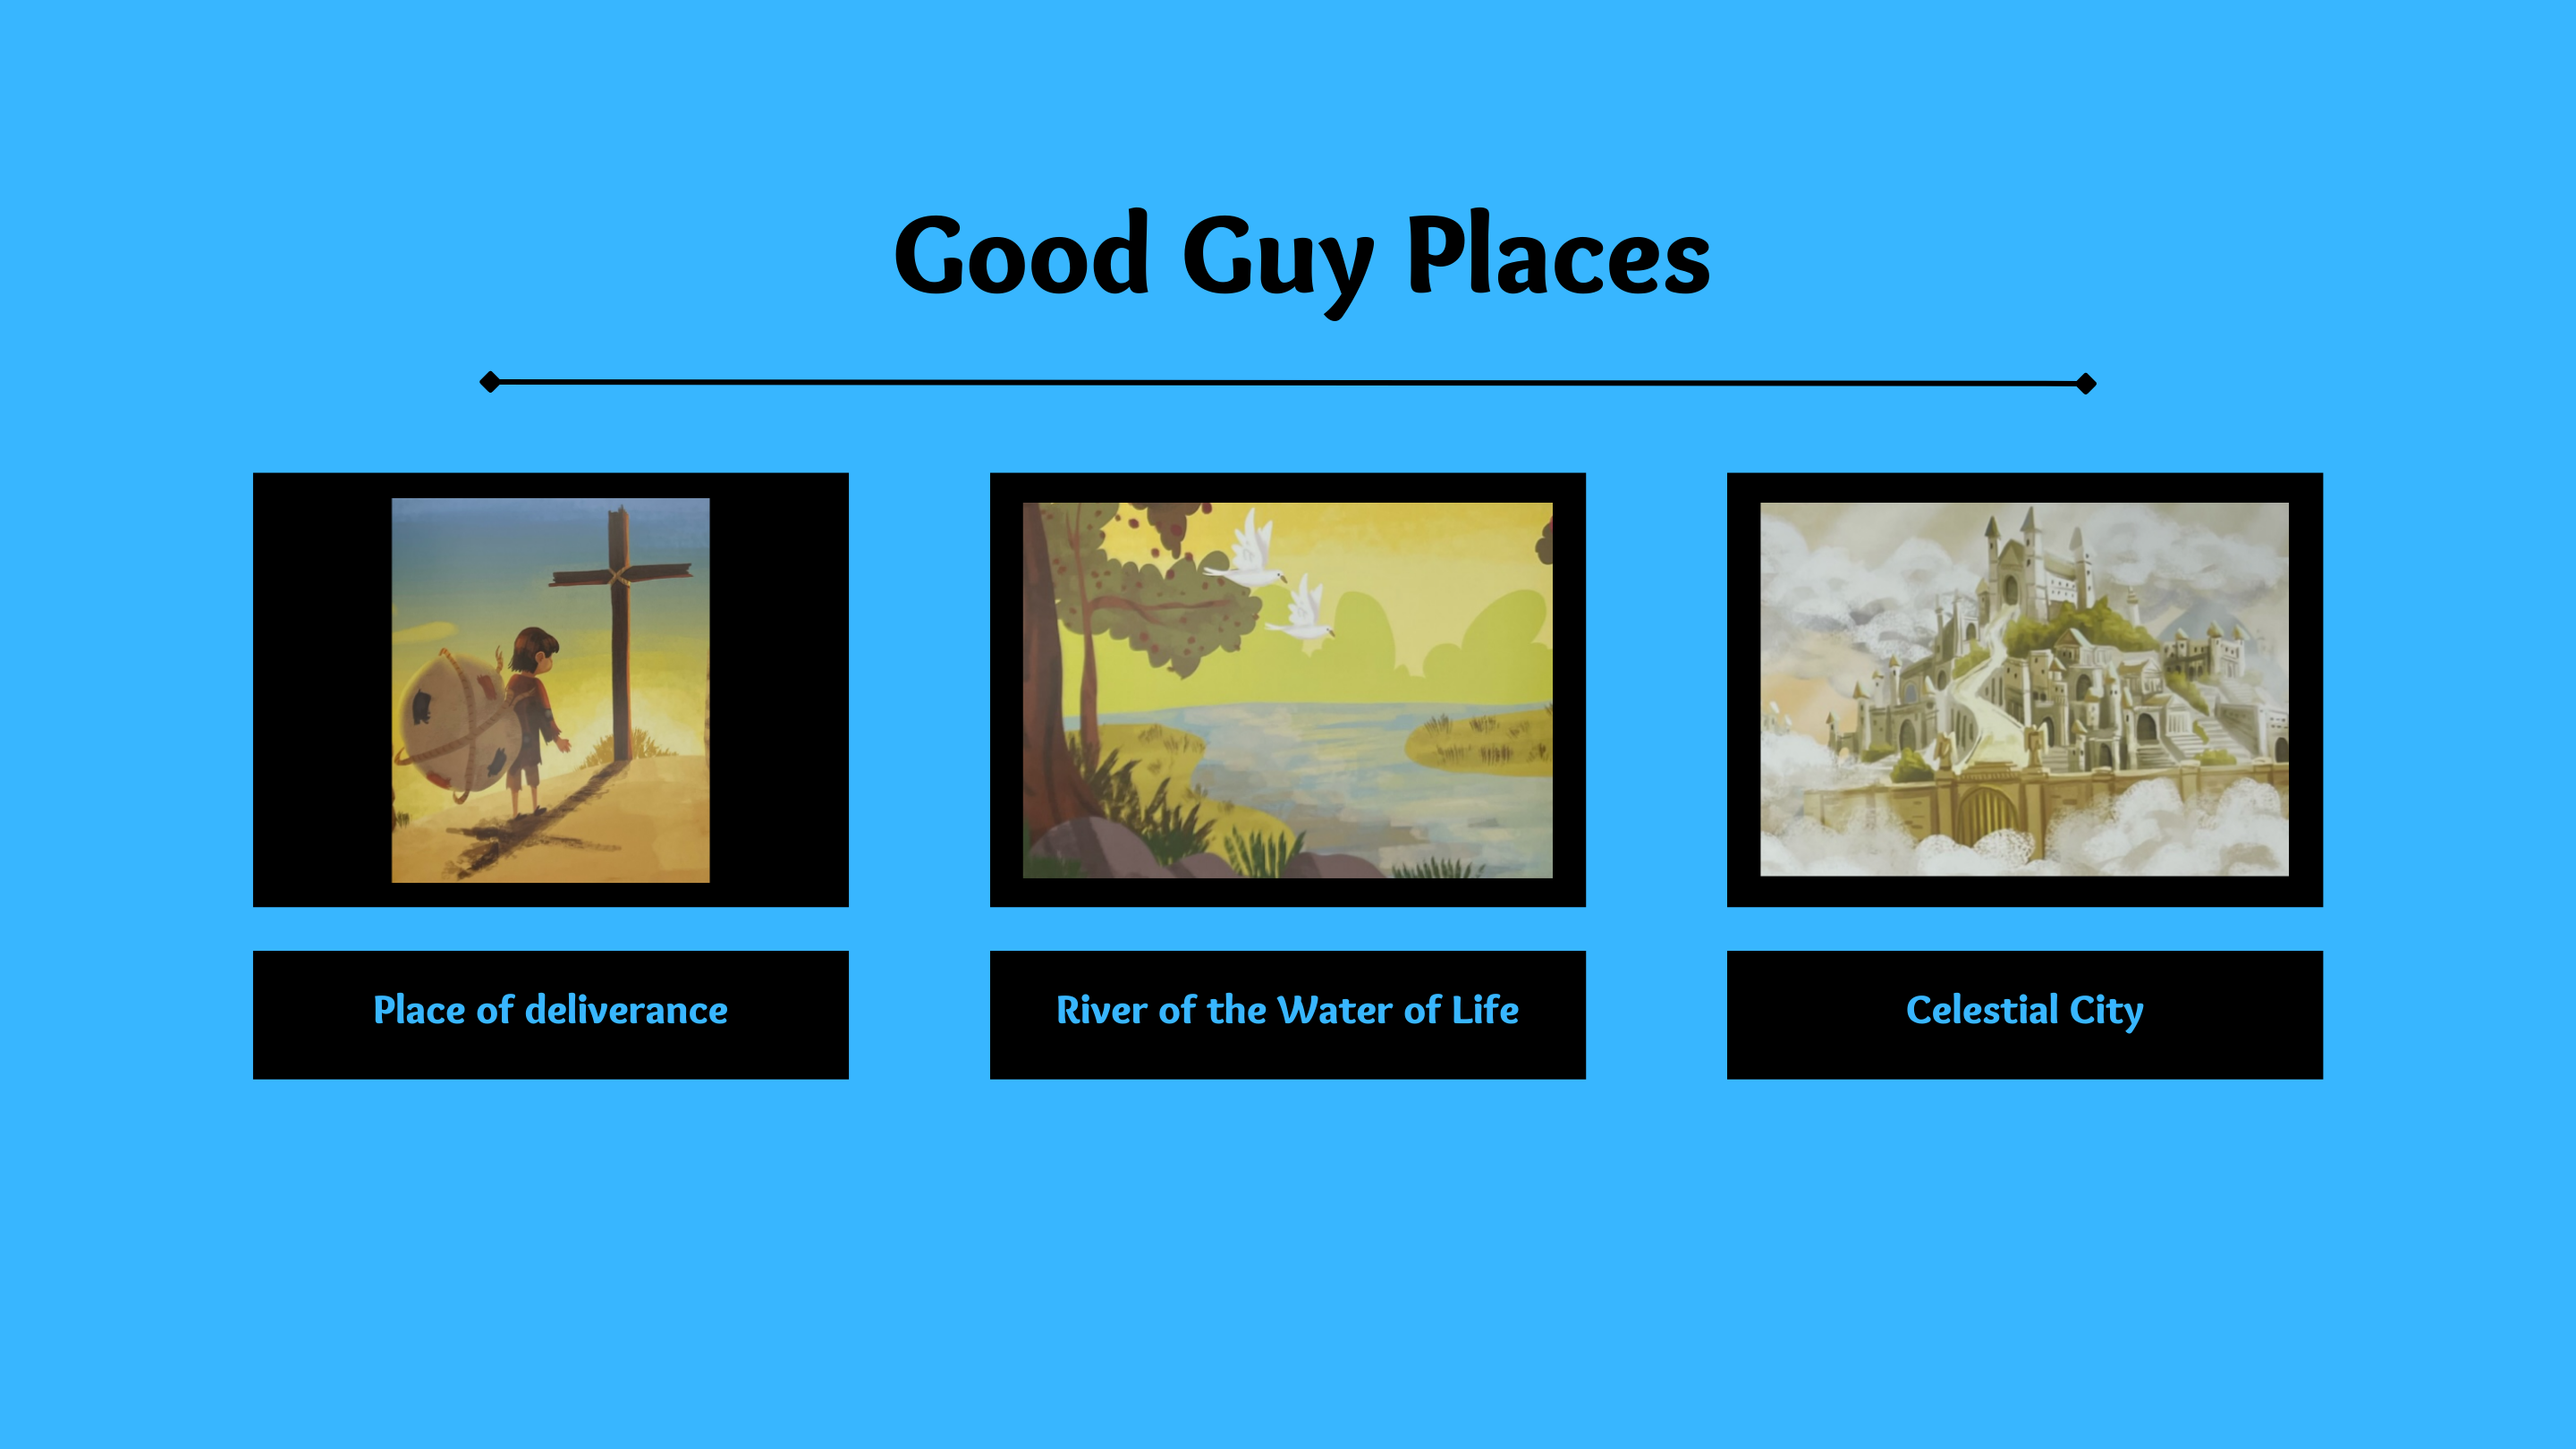 Modern Guide of 'Good Guy' Places in Little Pilgrim's Progress - Wholesome Family Books - Father Abraham